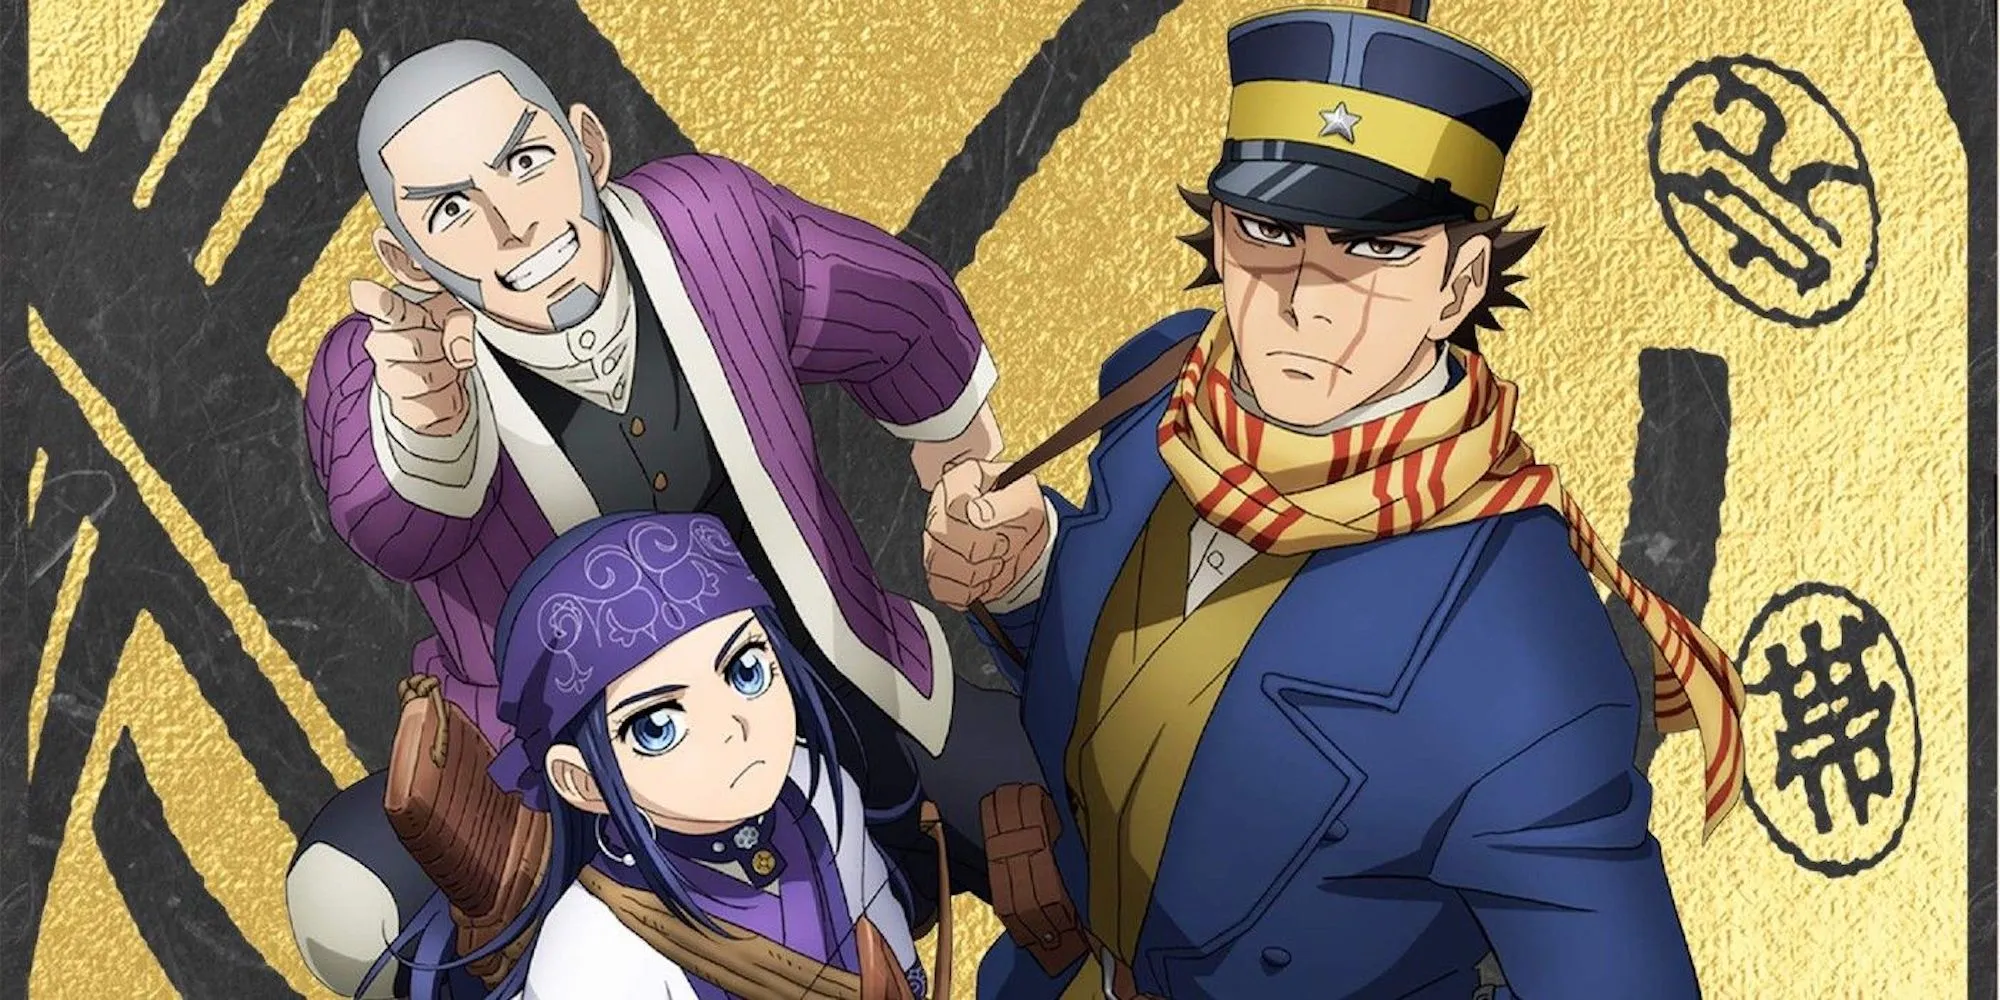 Promo art featuring characters from Golden Kamuy